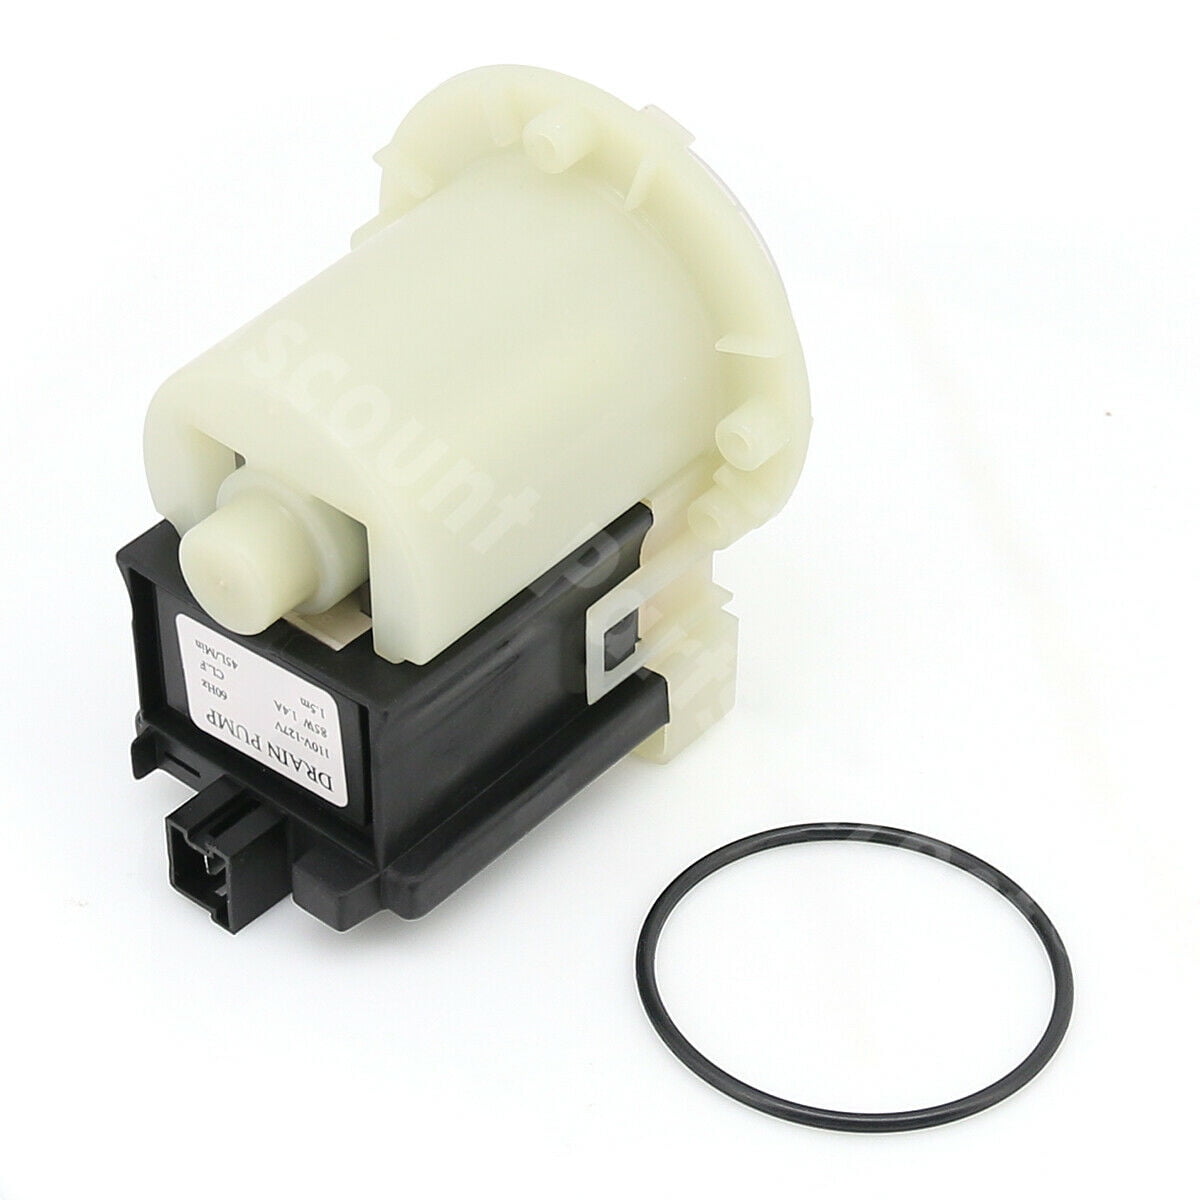 Details about   New Whirlpool 8181684 Water Drain Pump Motor 8182821 8182819 285998 6197020148 